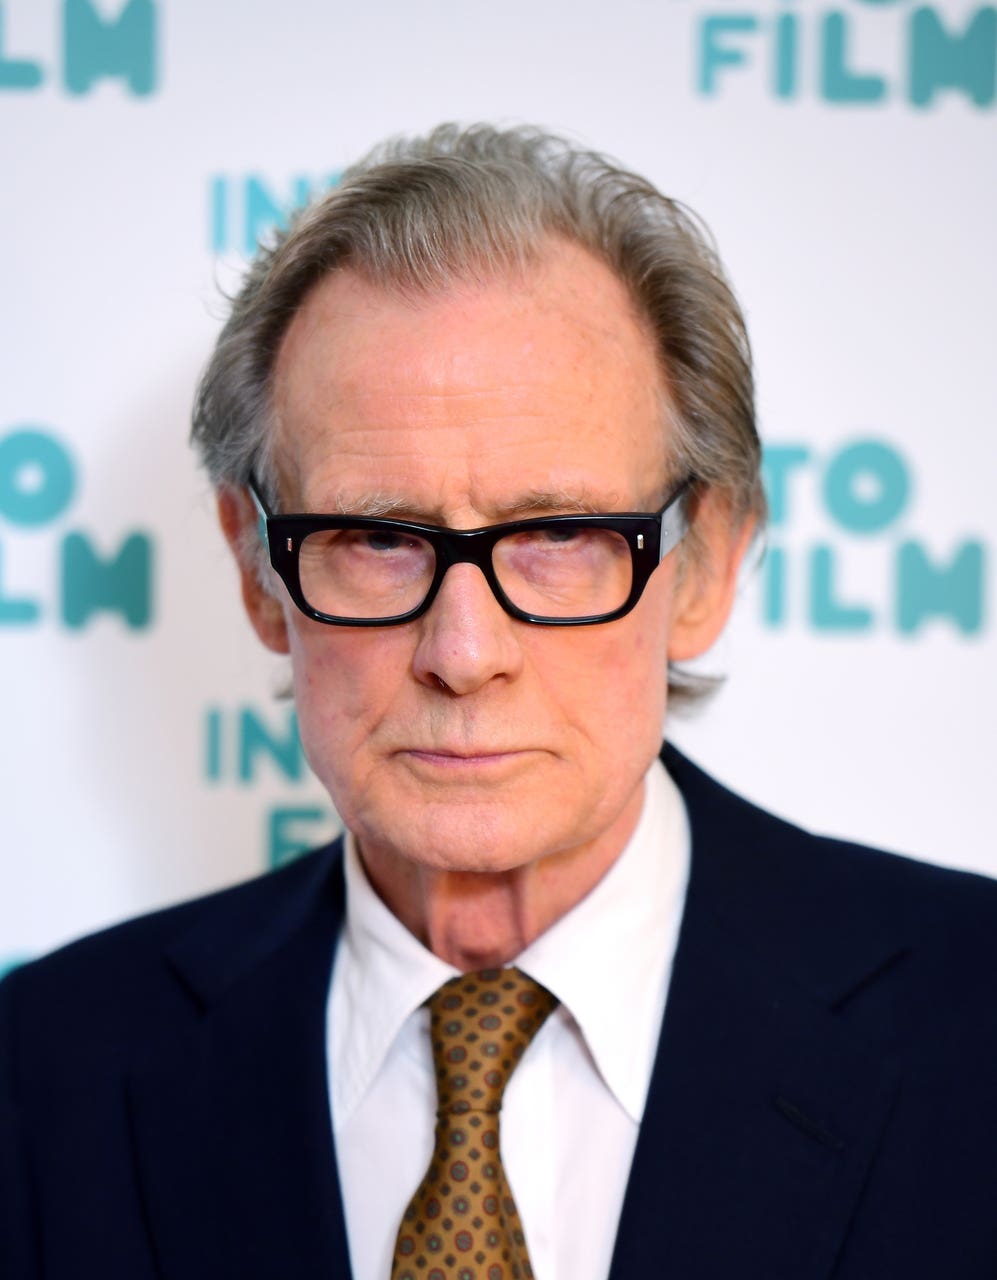 New image offers glimpse of Bill Nighy’s portrayal of a civil servant ...